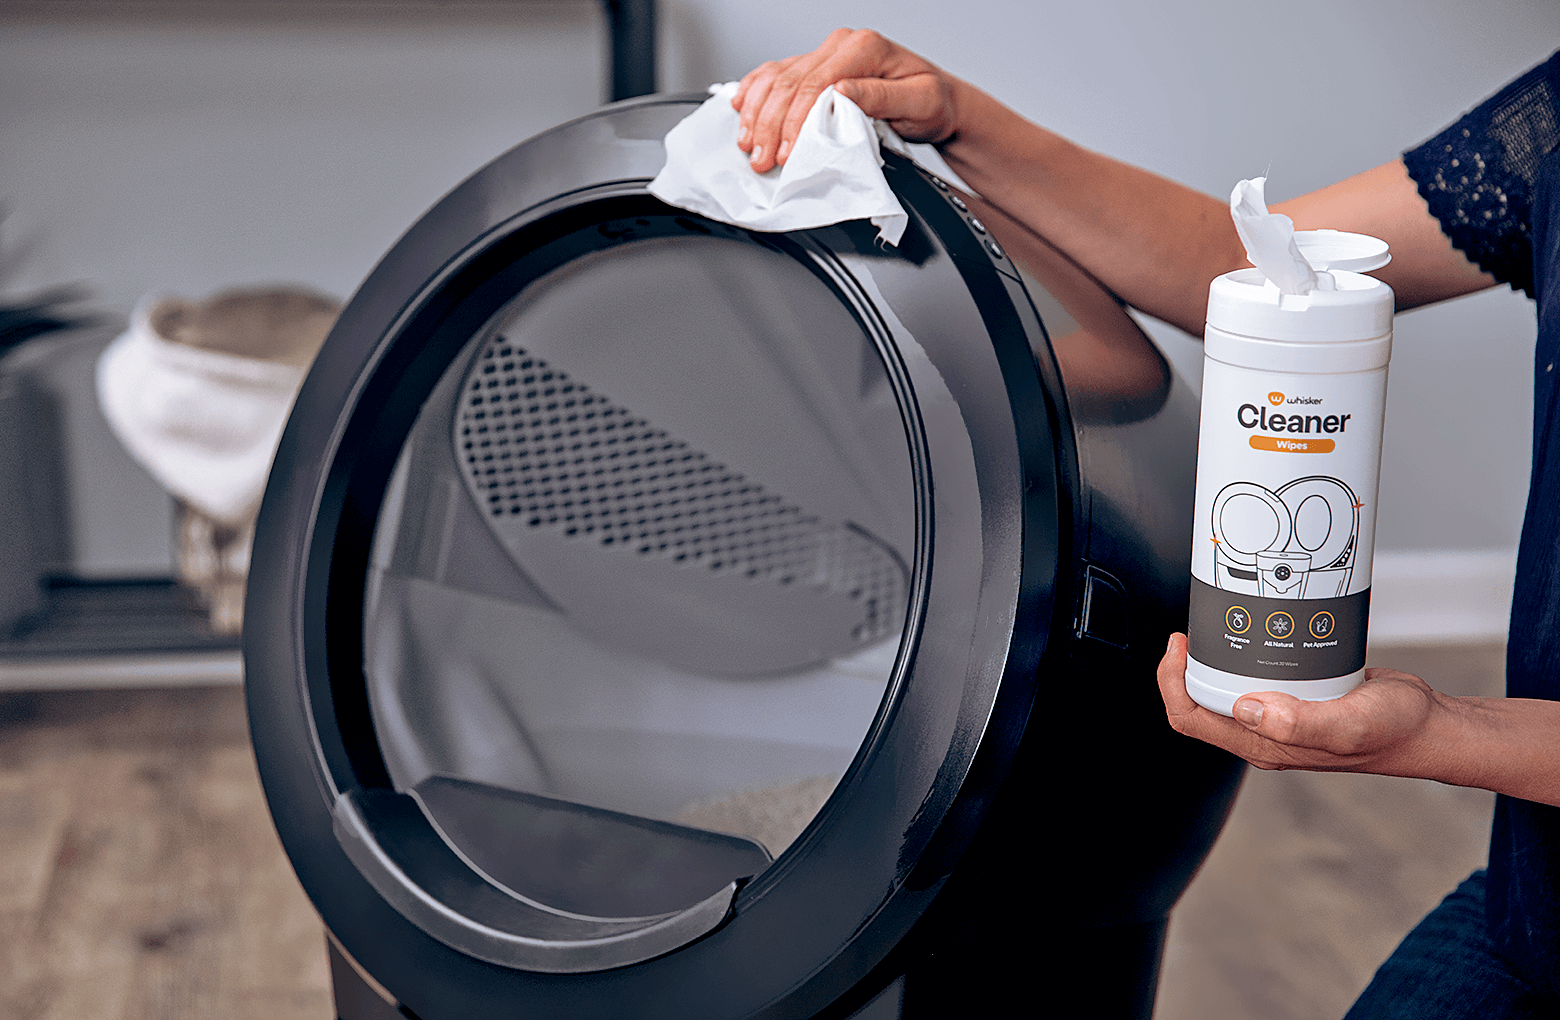 Whisker Cleaner Wipes used with Litter-Robot